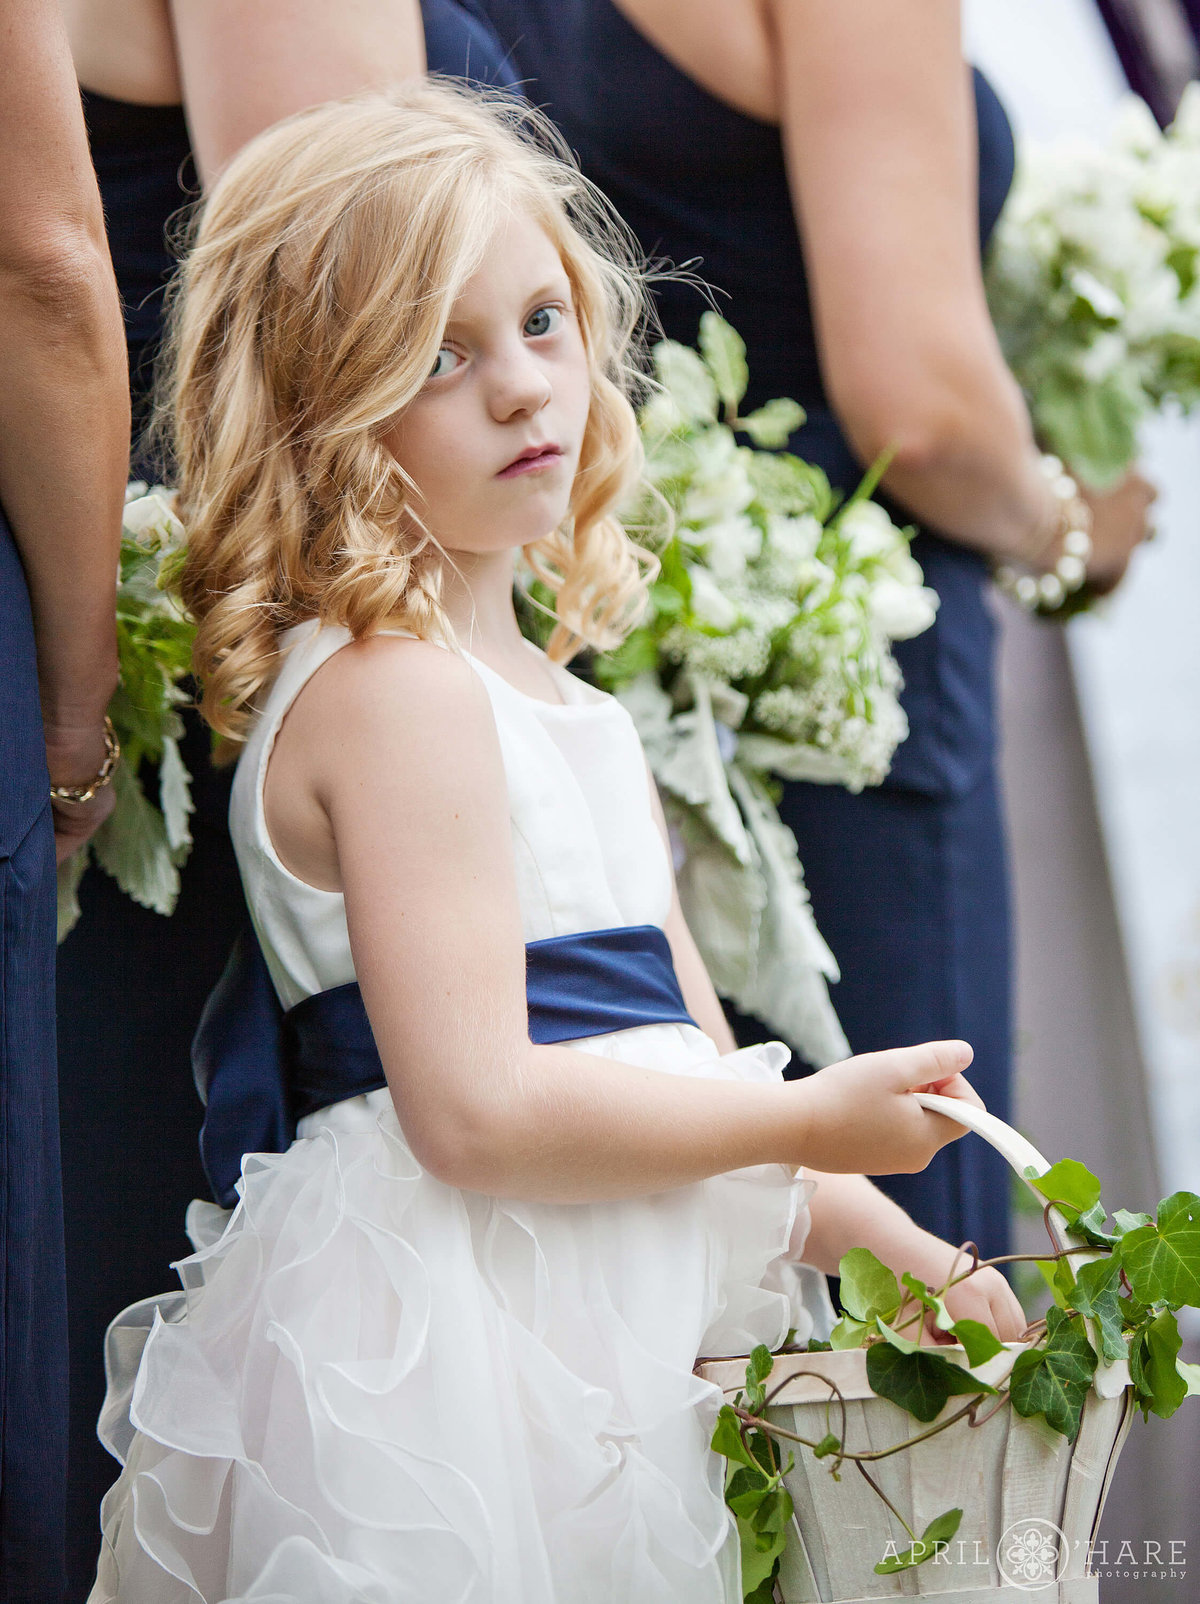 Serious flower girl during outdoor wedding ceremony in Boulder Colorado